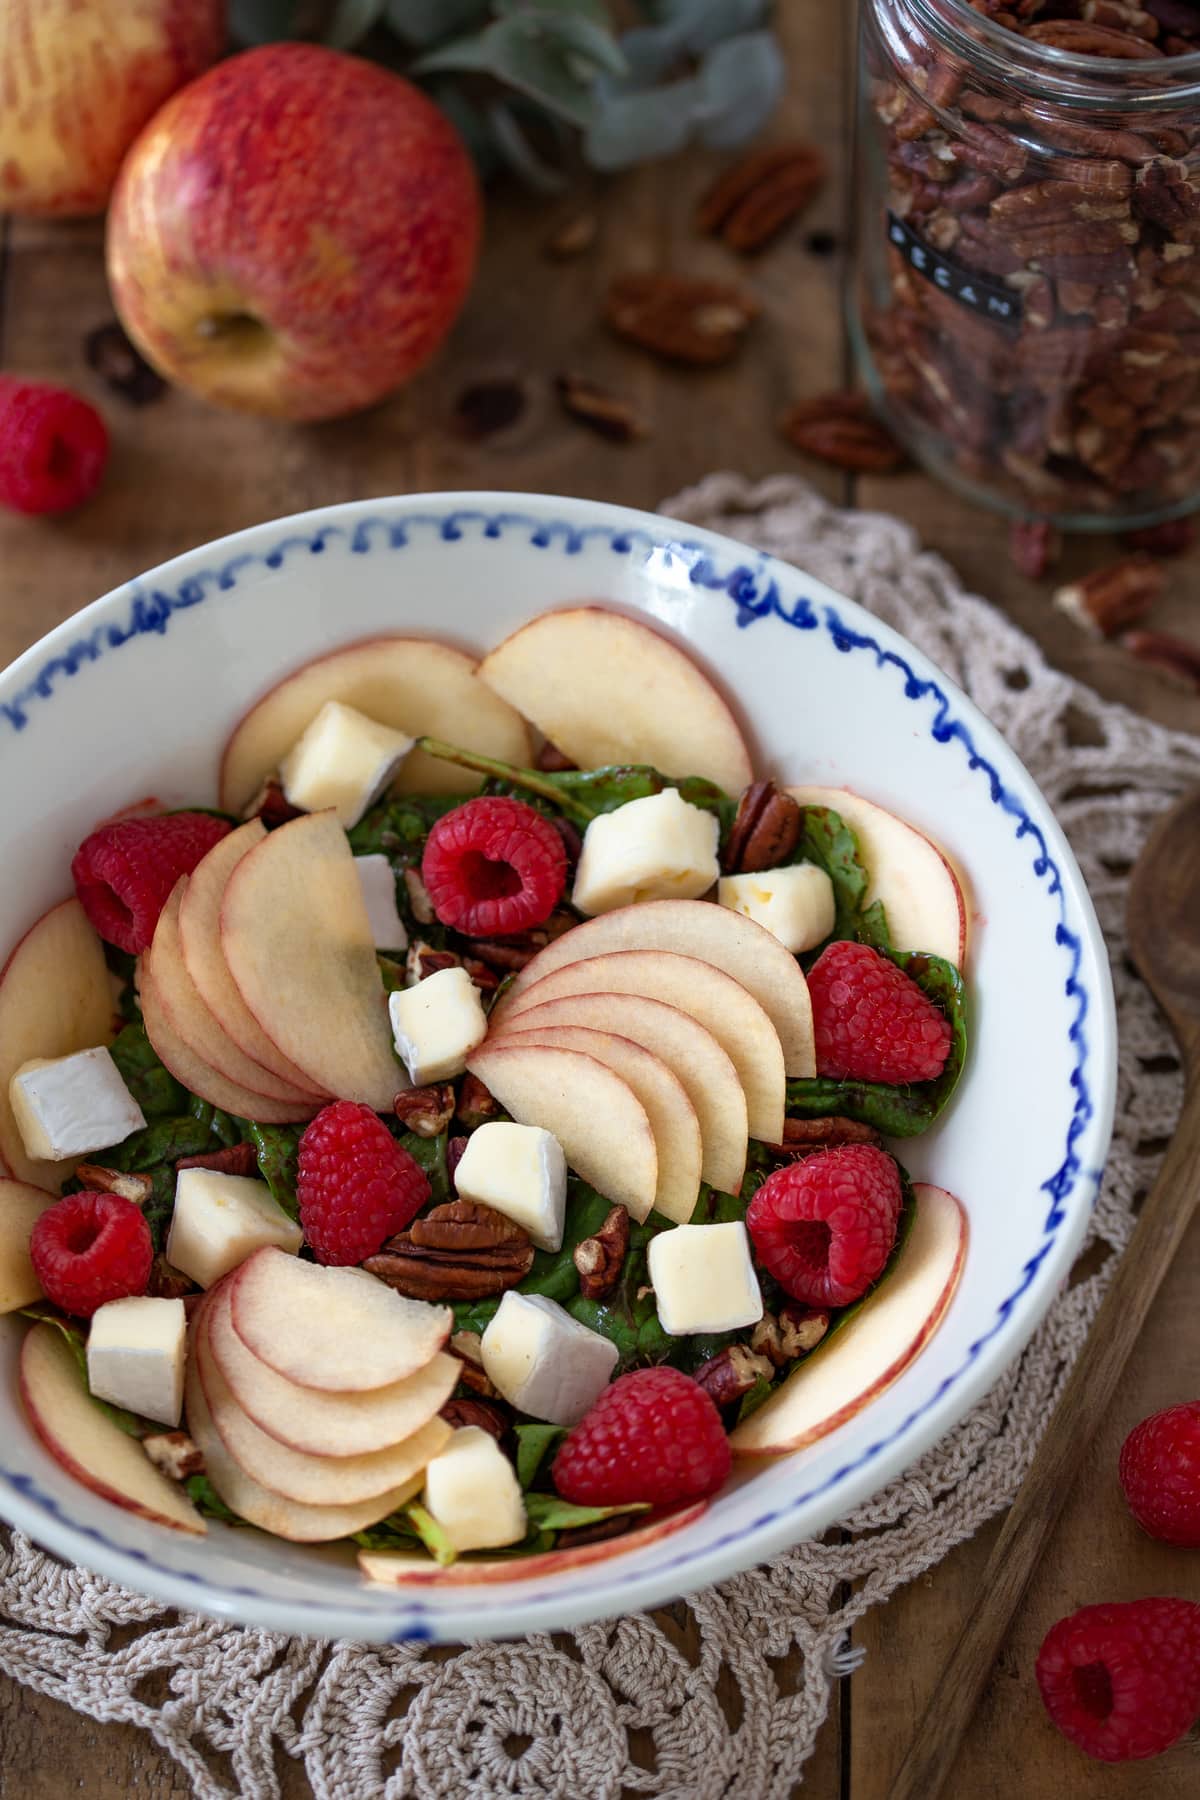 Apple brie salad with raspberries and pecans.